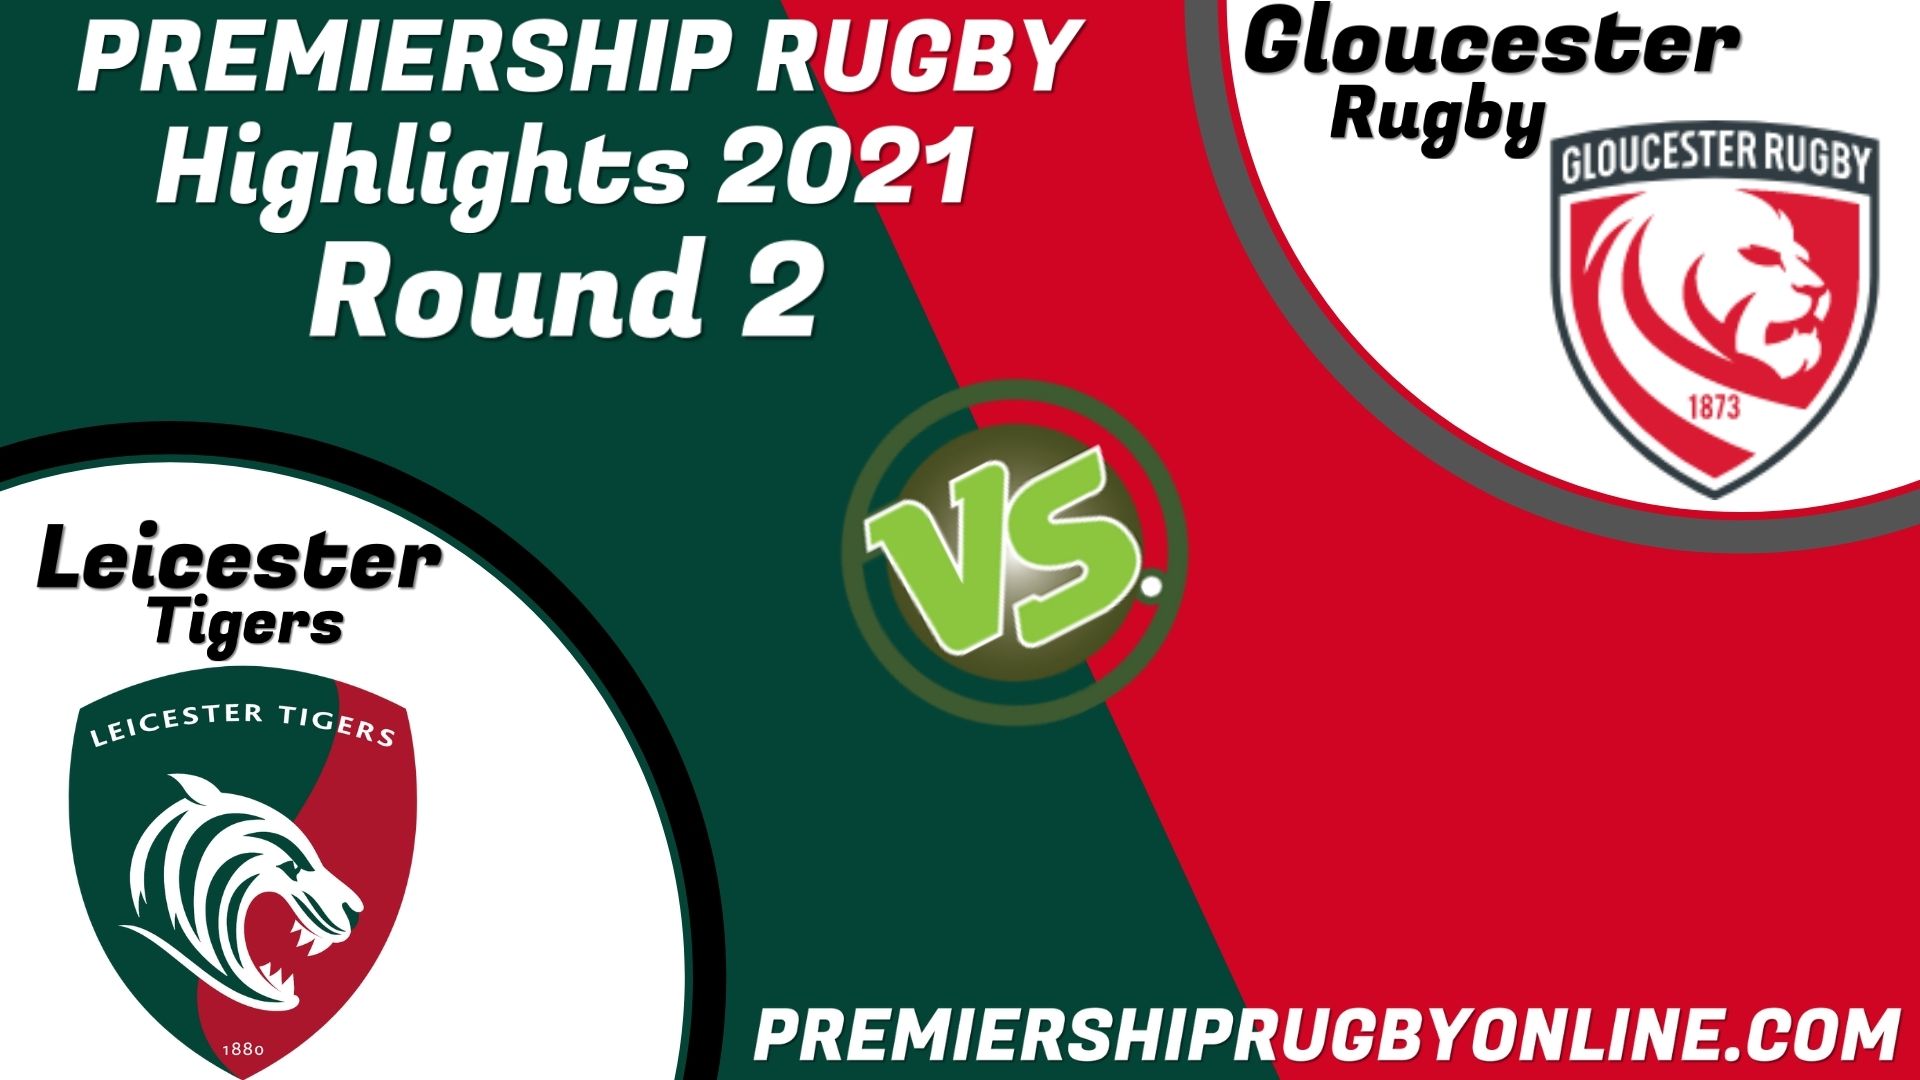 Gloucester Rugby Vs Leicester Tigers Highlights 2021 RD 2